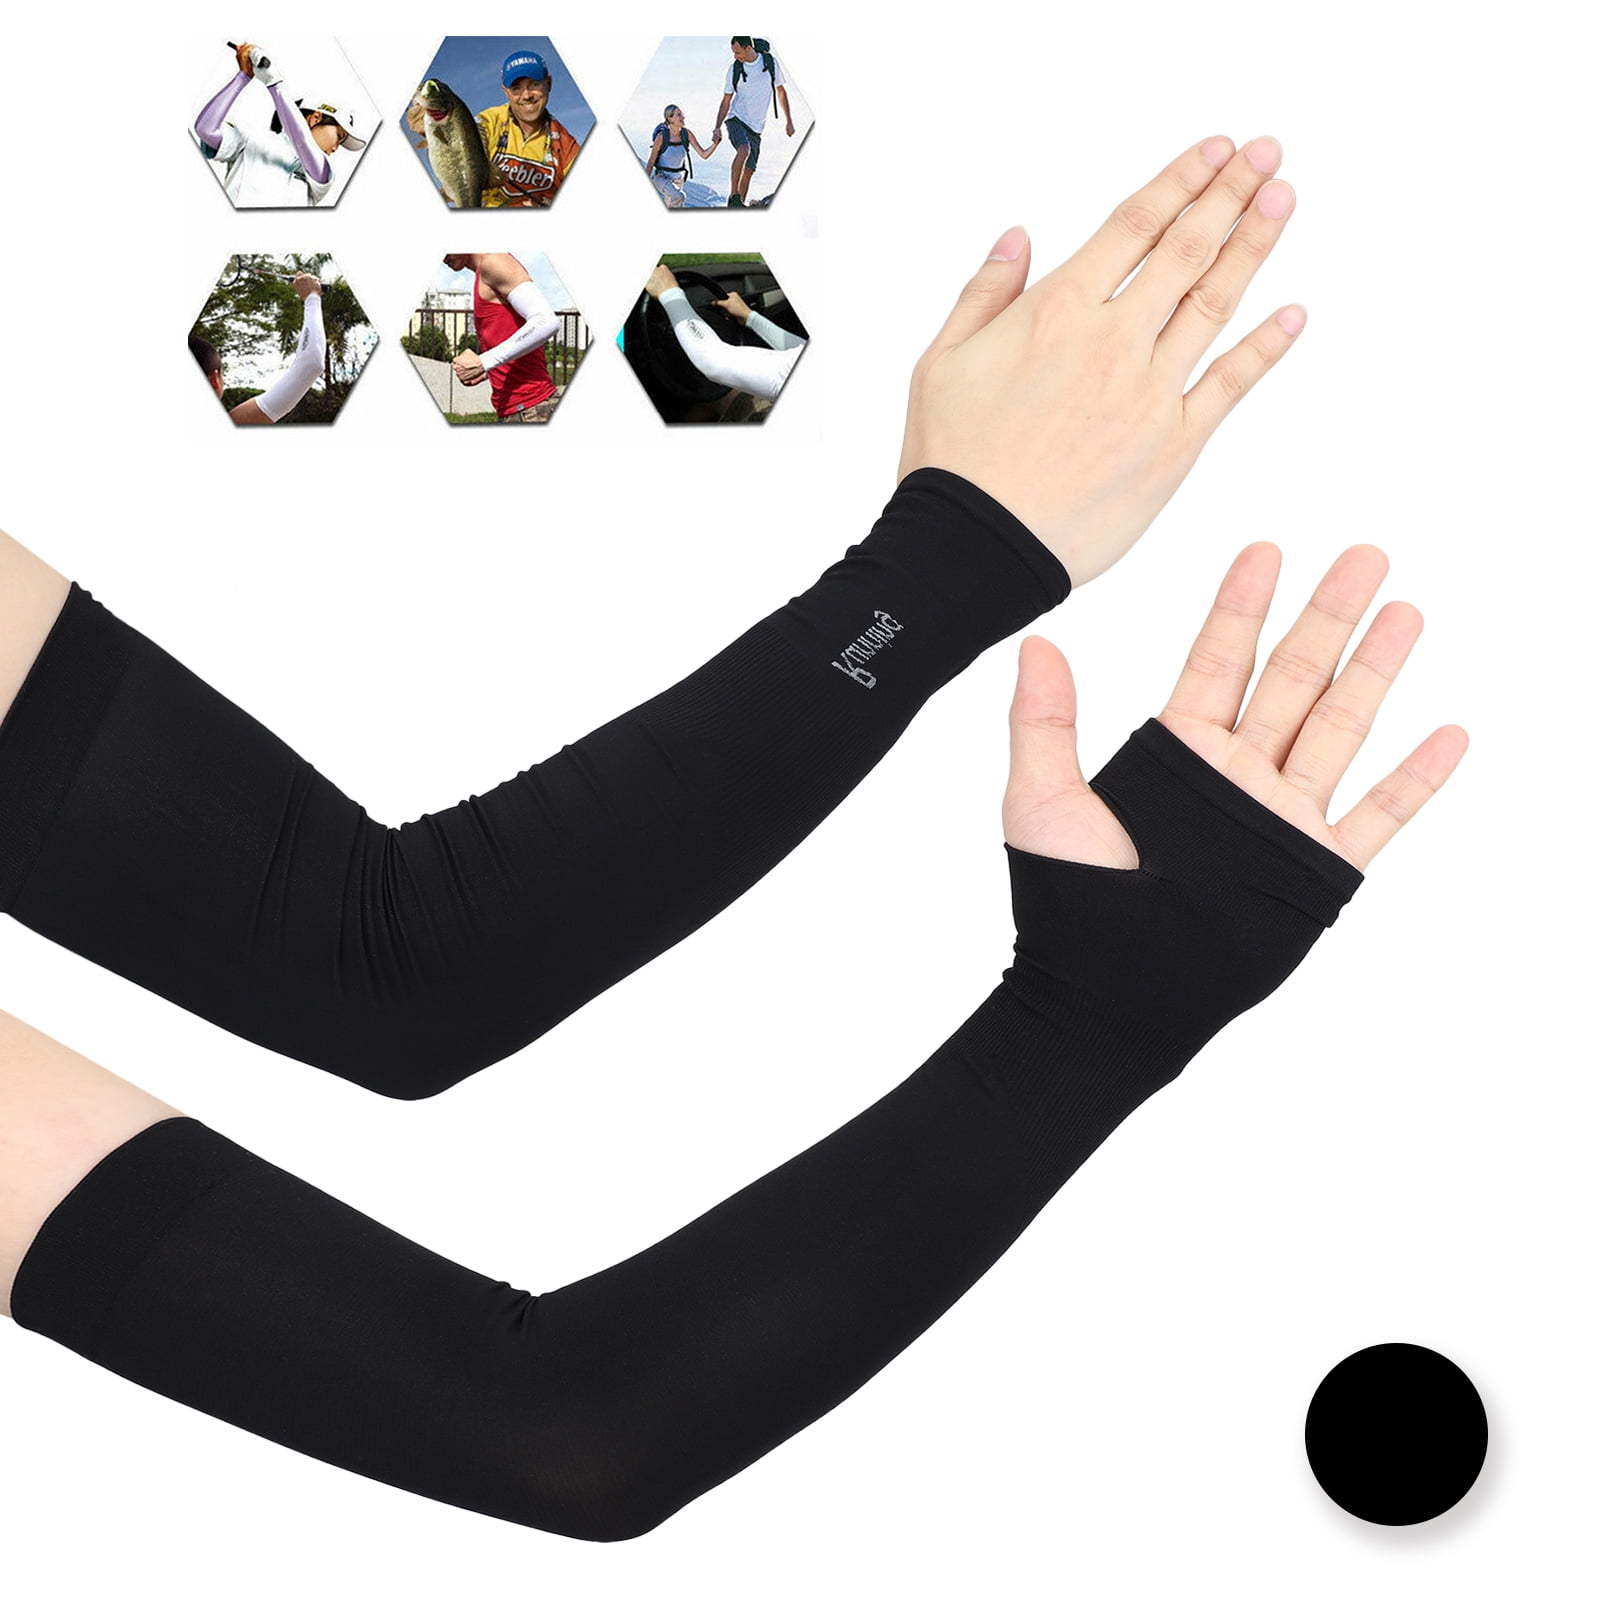 Huadduo Cat Nap Womens Anti-uv Sun Protection Cooling Arm Sun Sports Sleeves Gloves